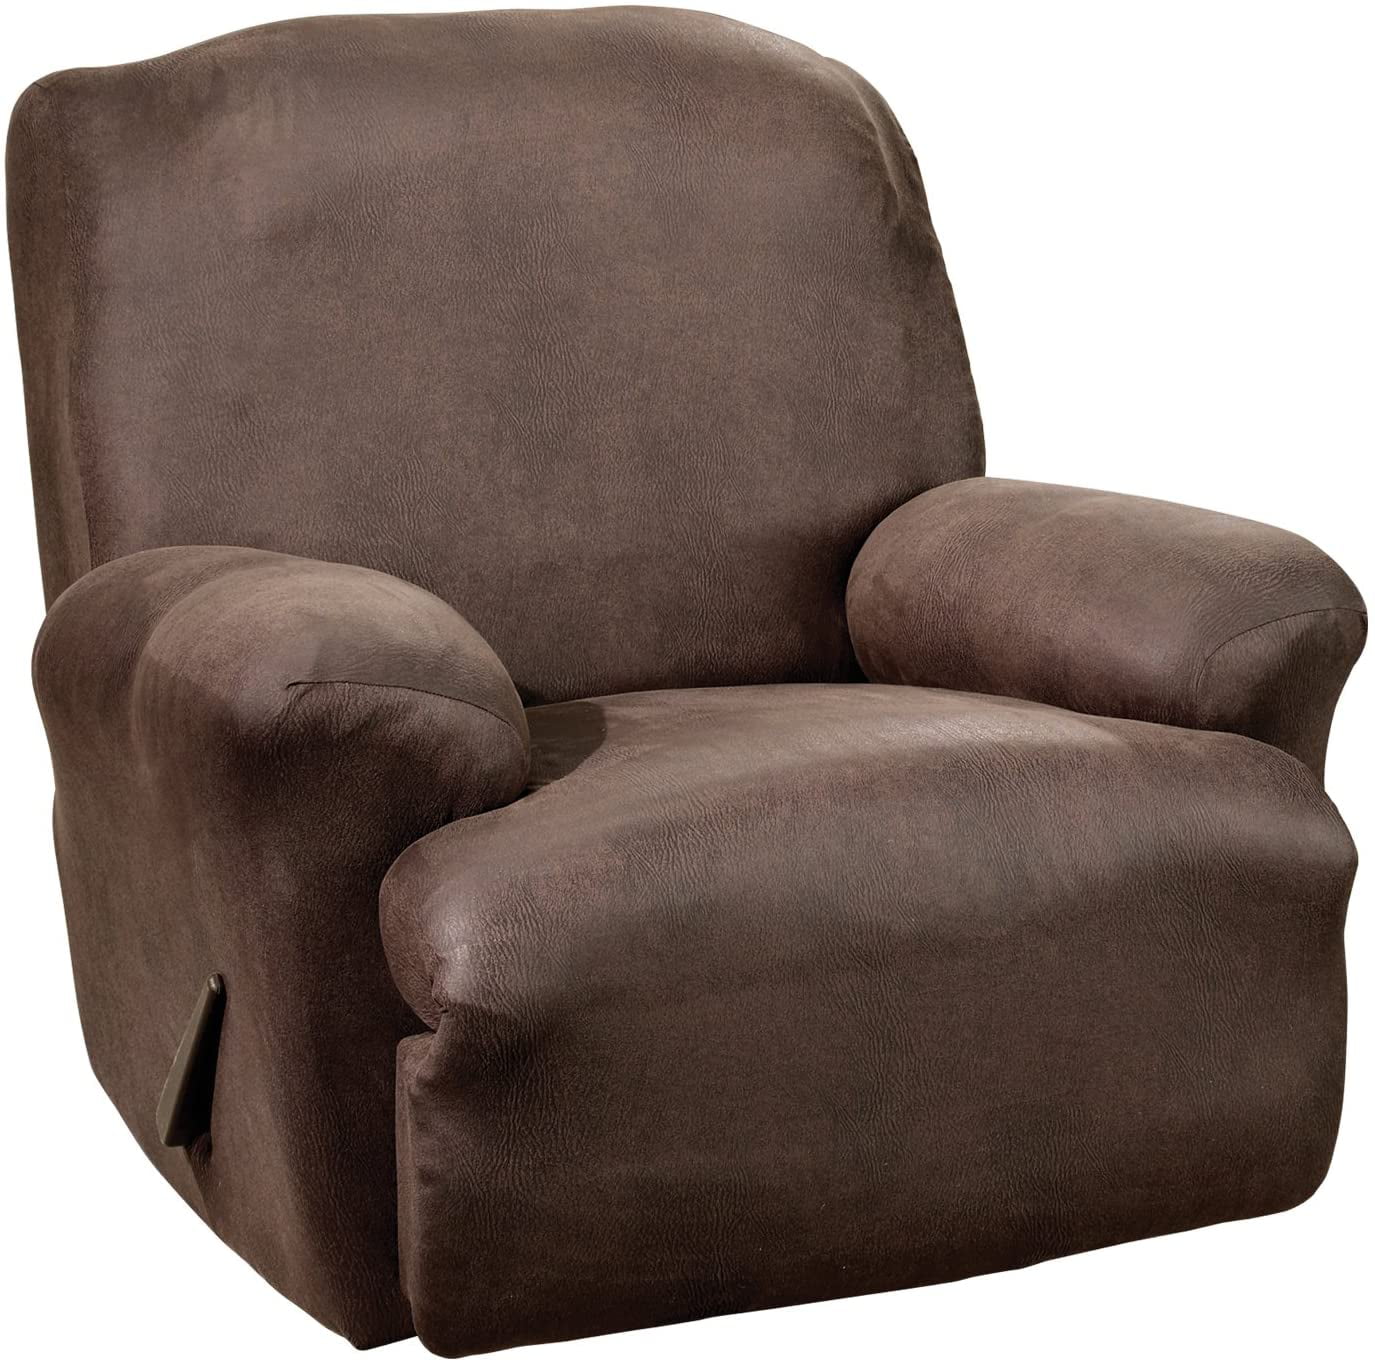 Sure Fit Stretch Leather Recliner, Faux Leather Slipcover